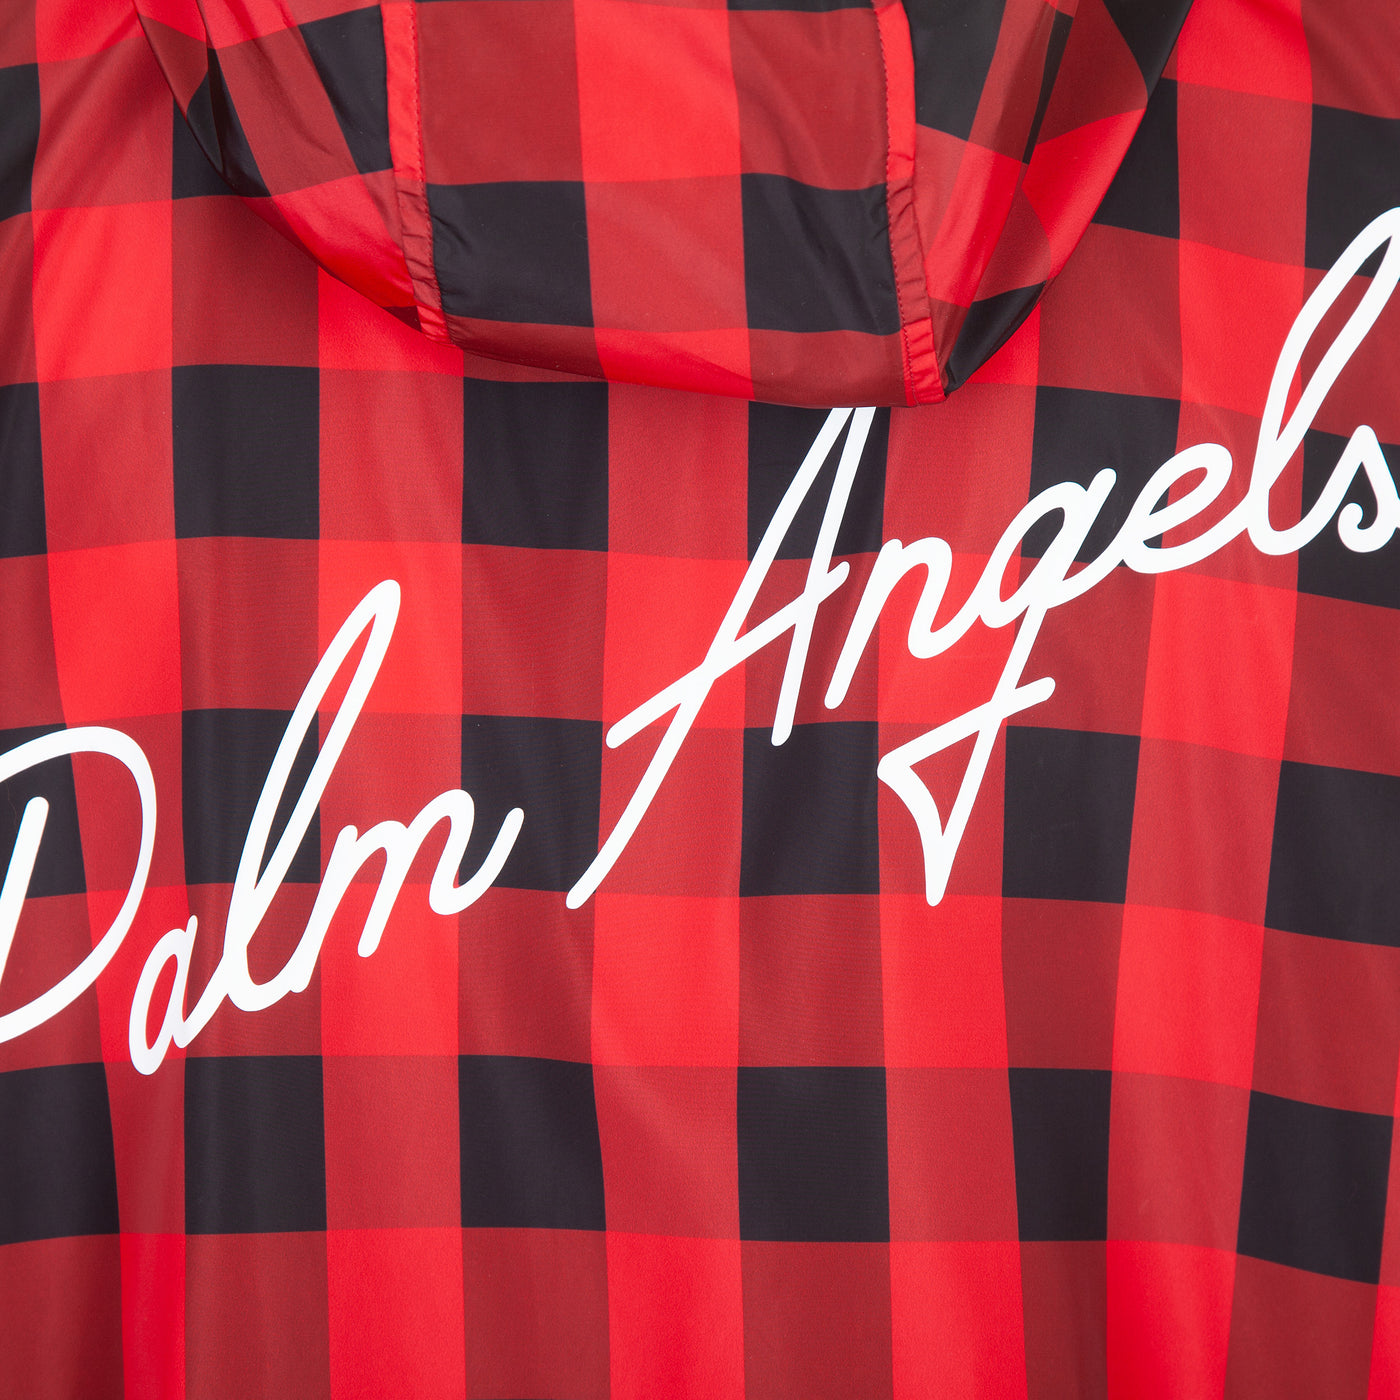 Palm Angels Check Print Hooded Jacket